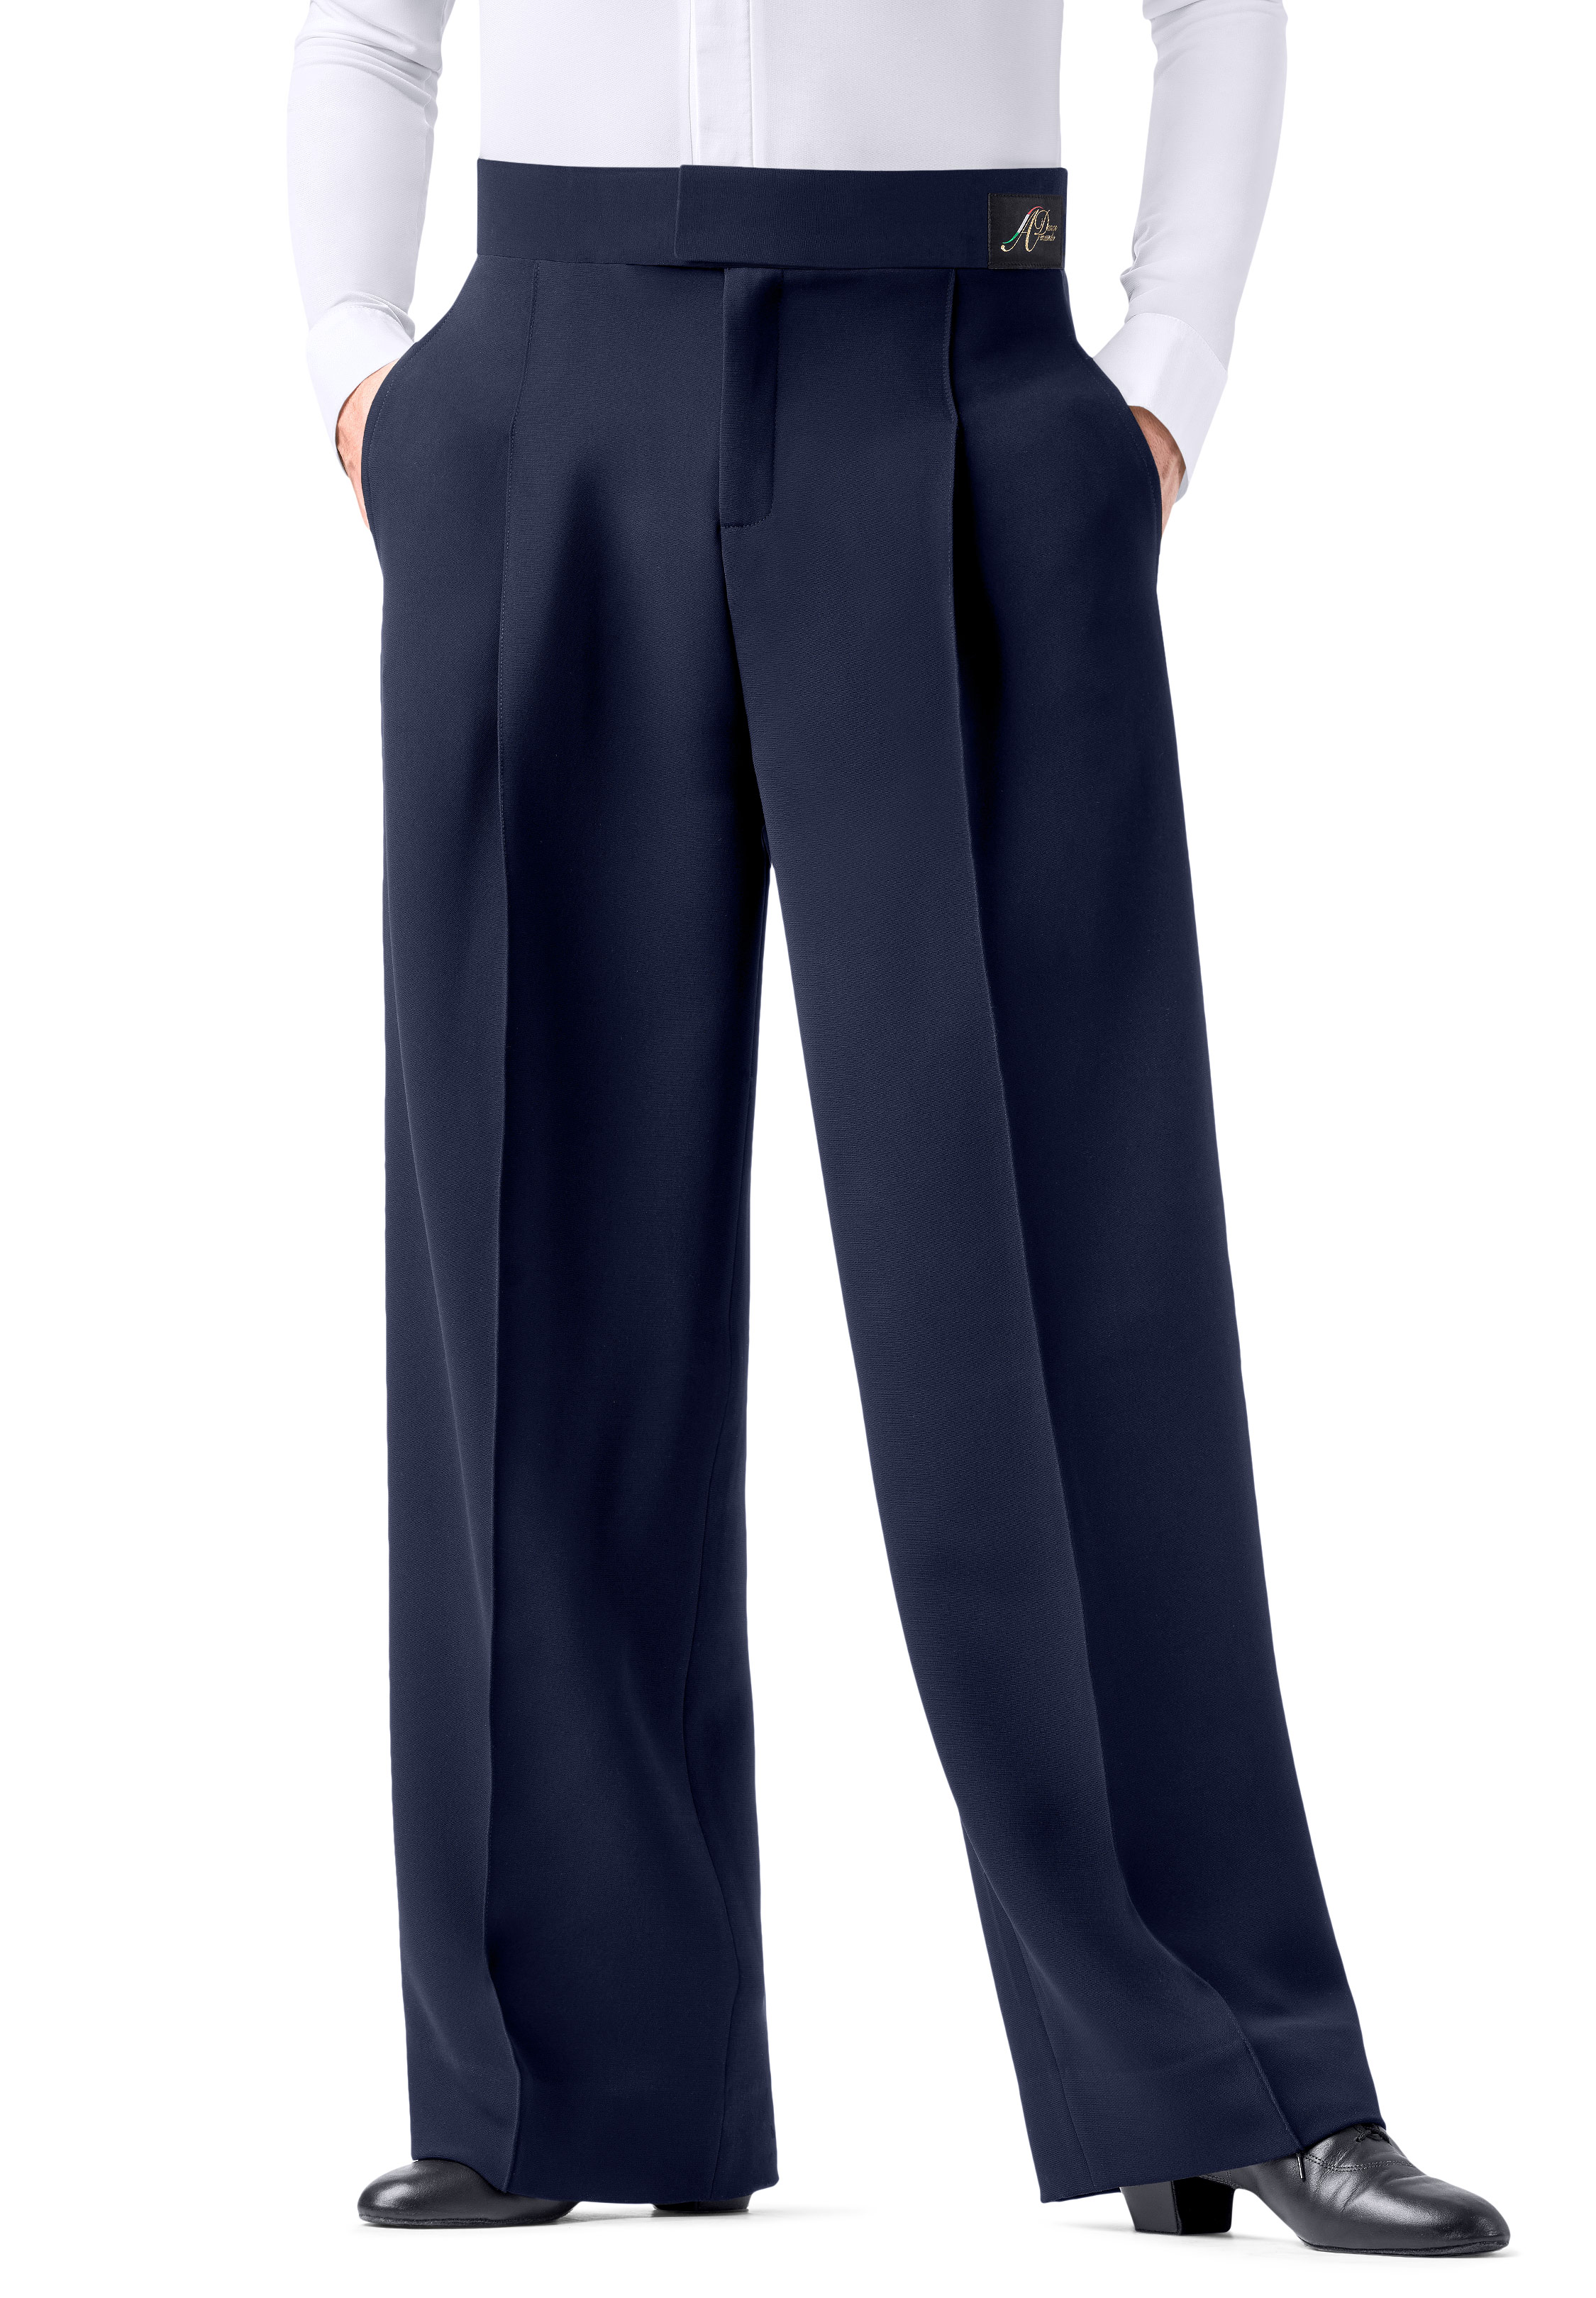 Men's pleated trousers guide - Blugiallo - Expressive Luxury official shop